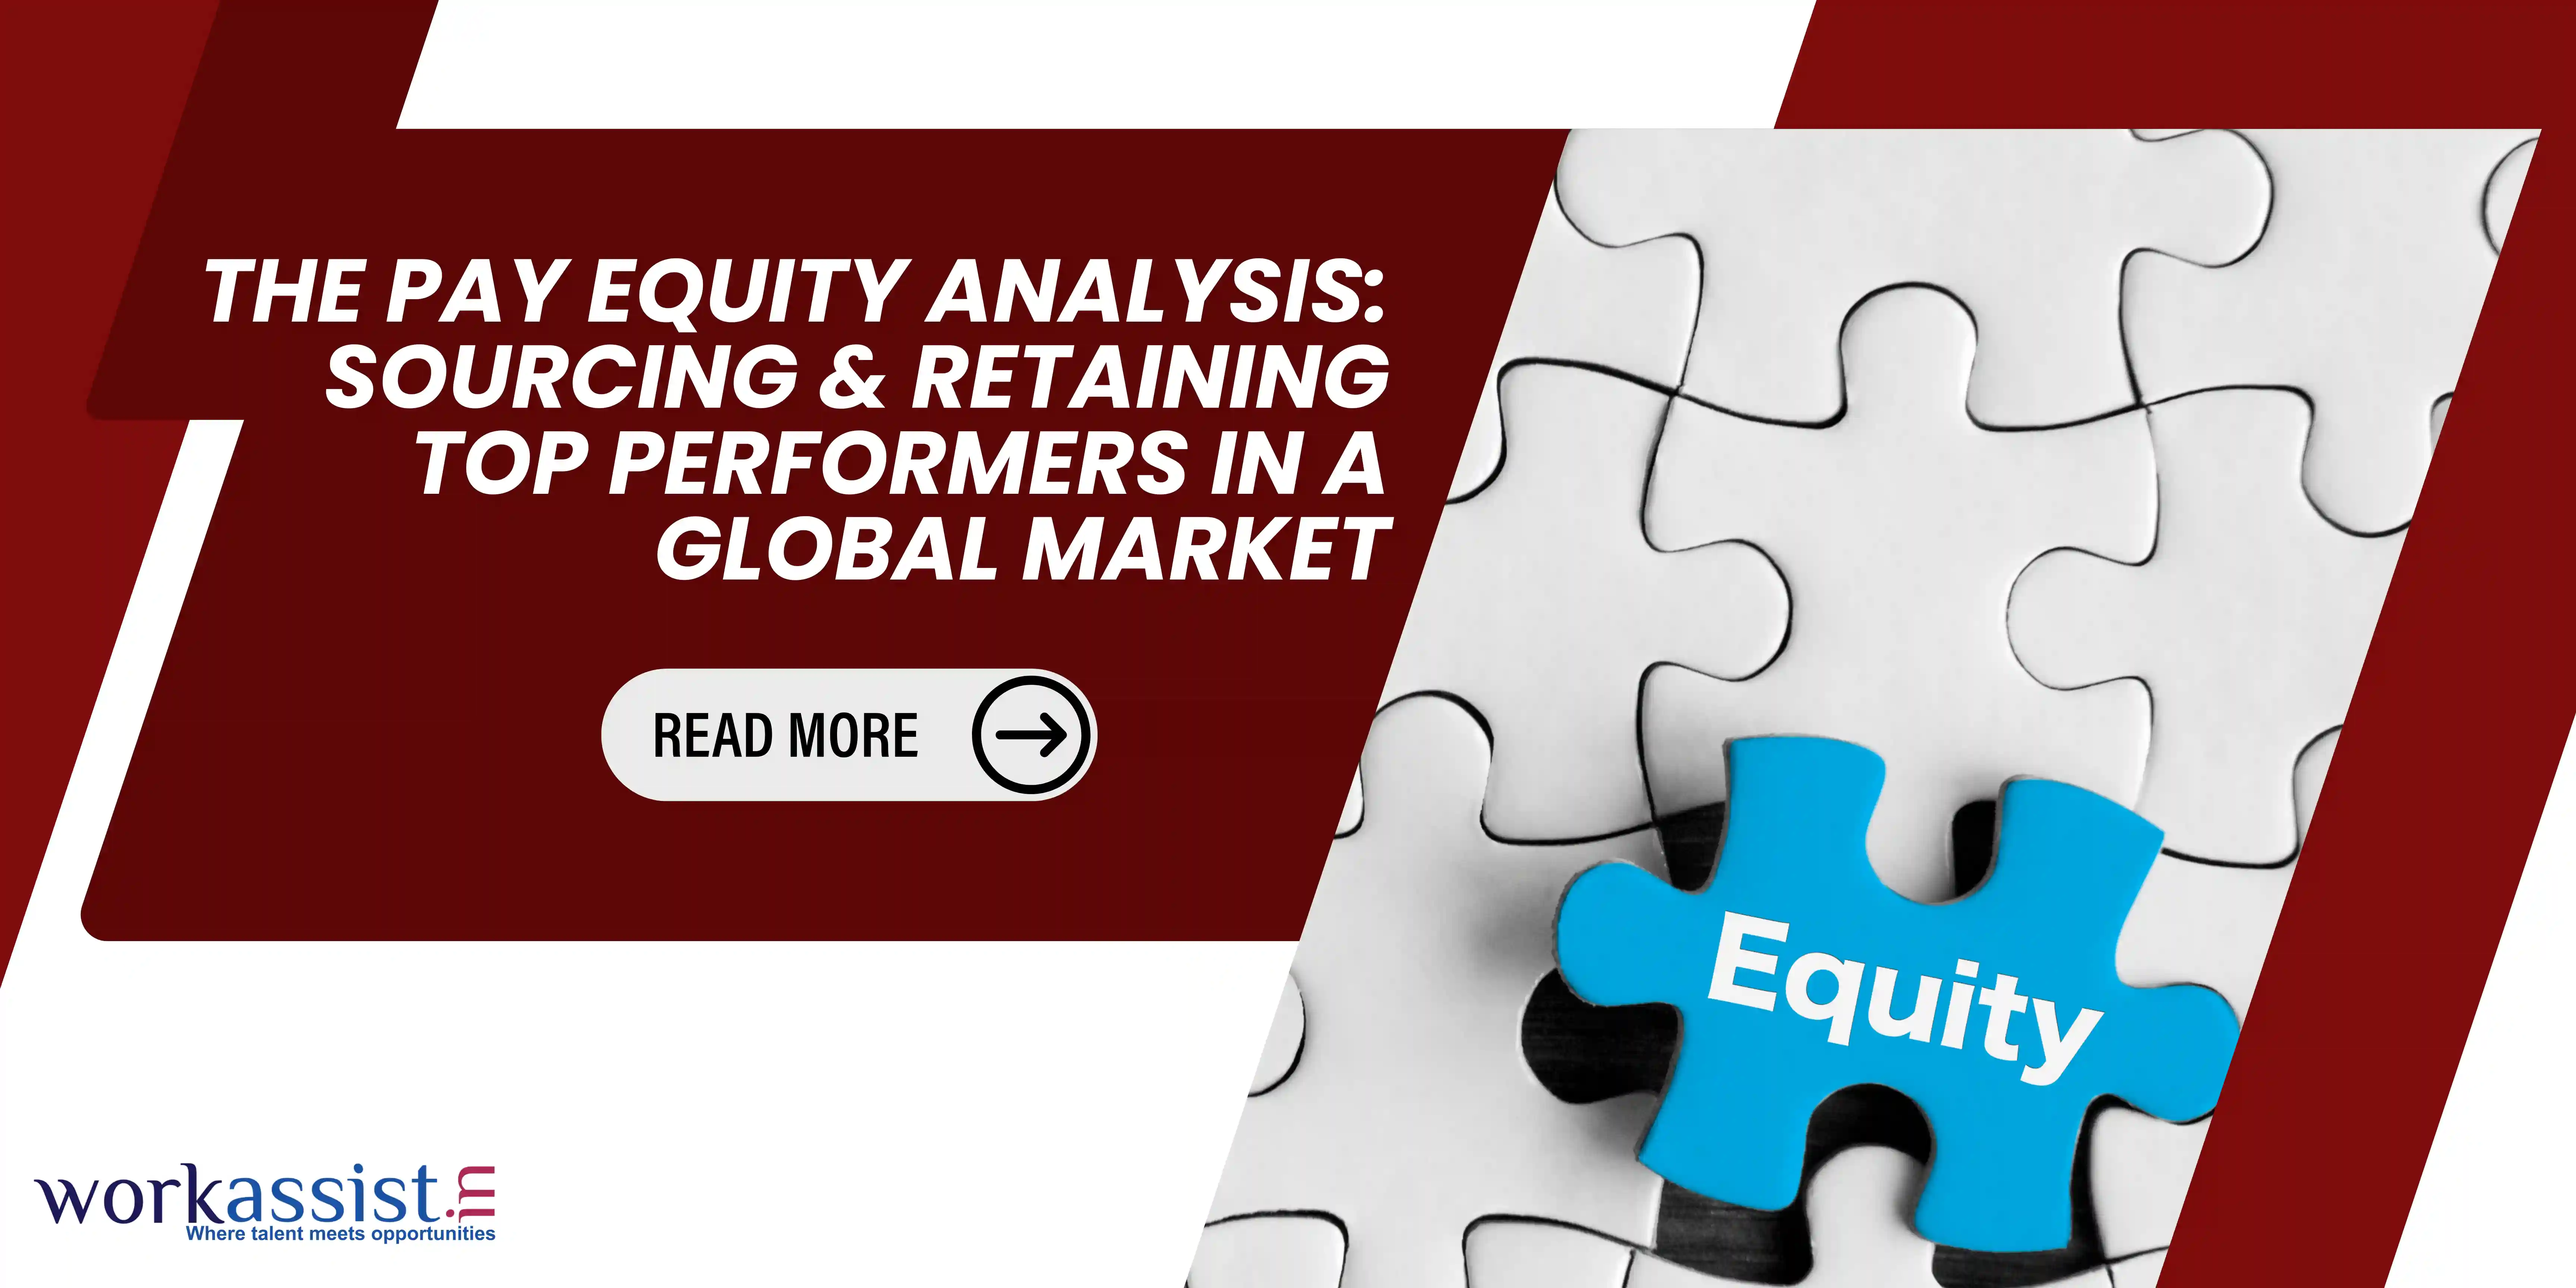 The Pay Equity Analysis: Sourcing & Retaining Top Performers in a Global Market